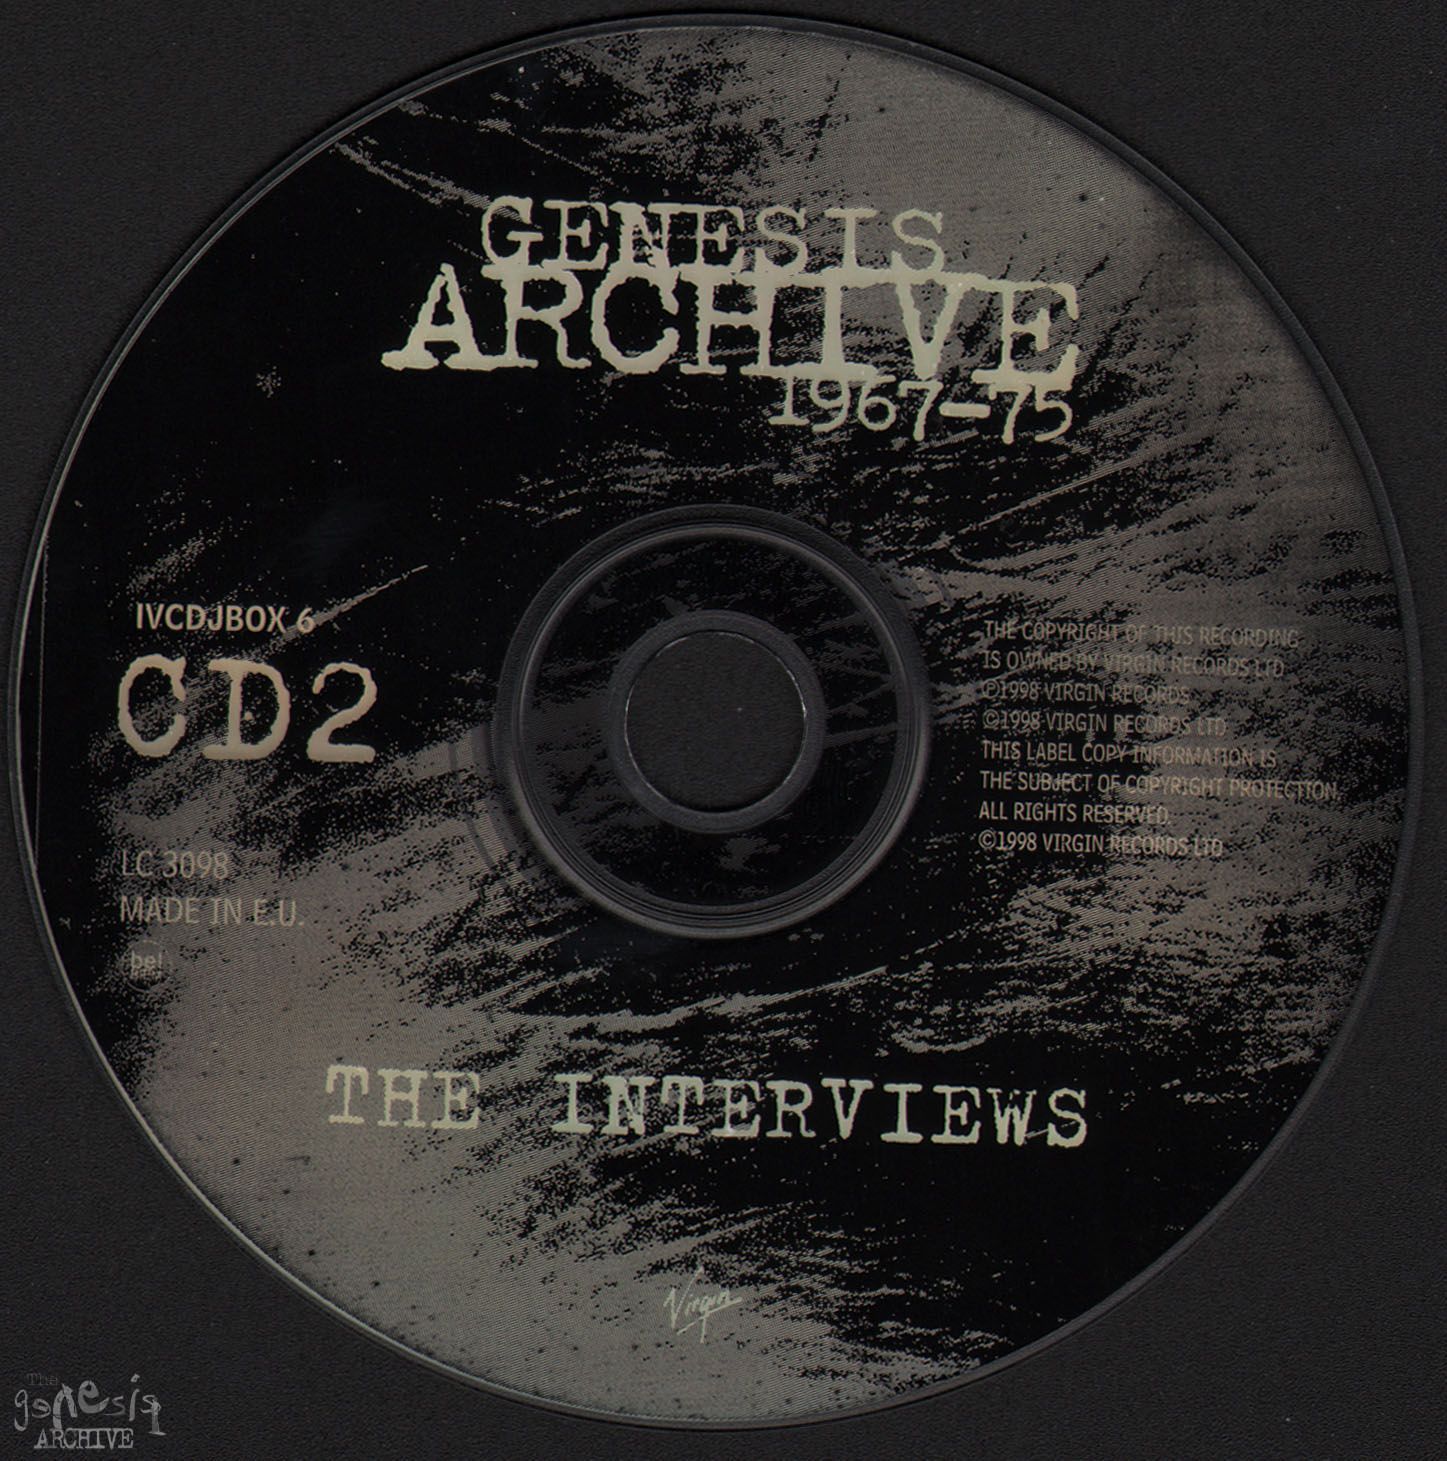 Genesis Archive One 1967 to 1975 Interview Double CD.